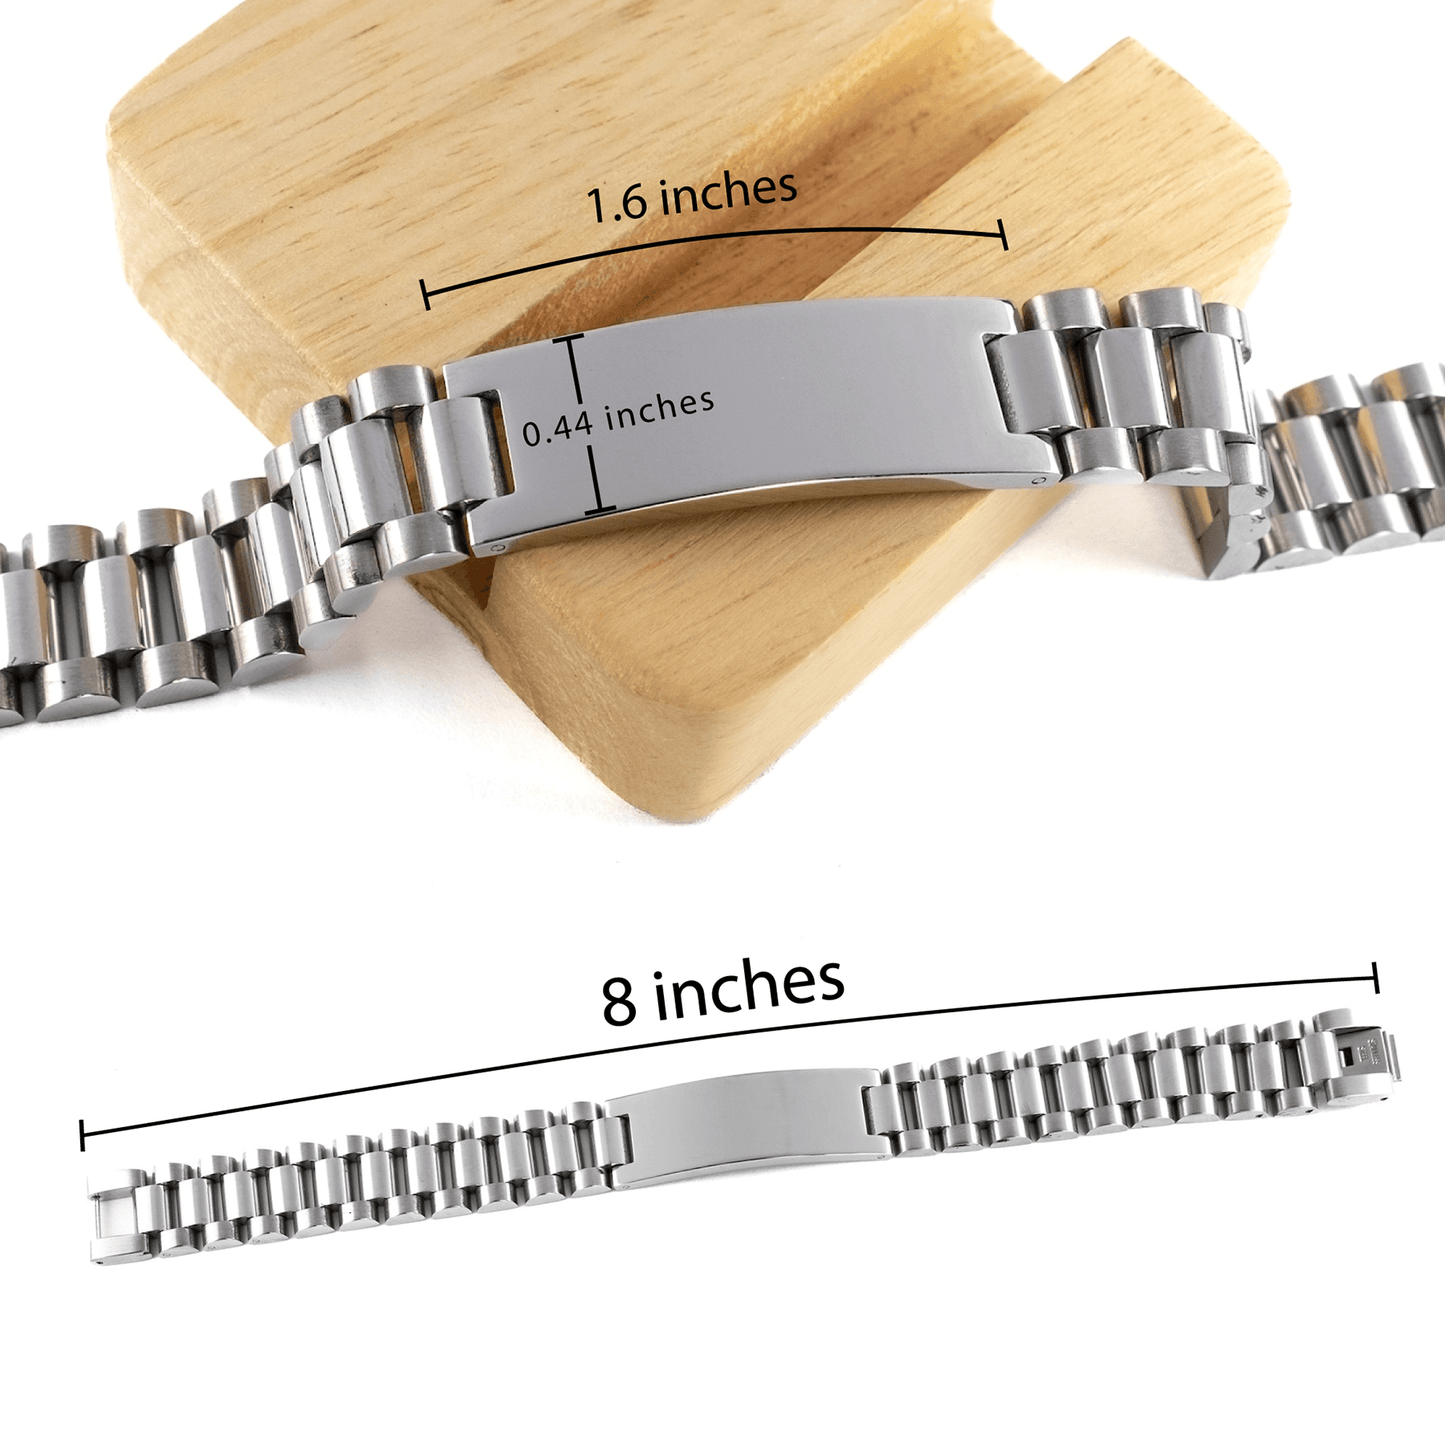 Linguist Ladder Stainless Steel Engraved Bracelet - Thanks for being who you are - Birthday Christmas Jewelry Gifts Coworkers Colleague Boss - Mallard Moon Gift Shop